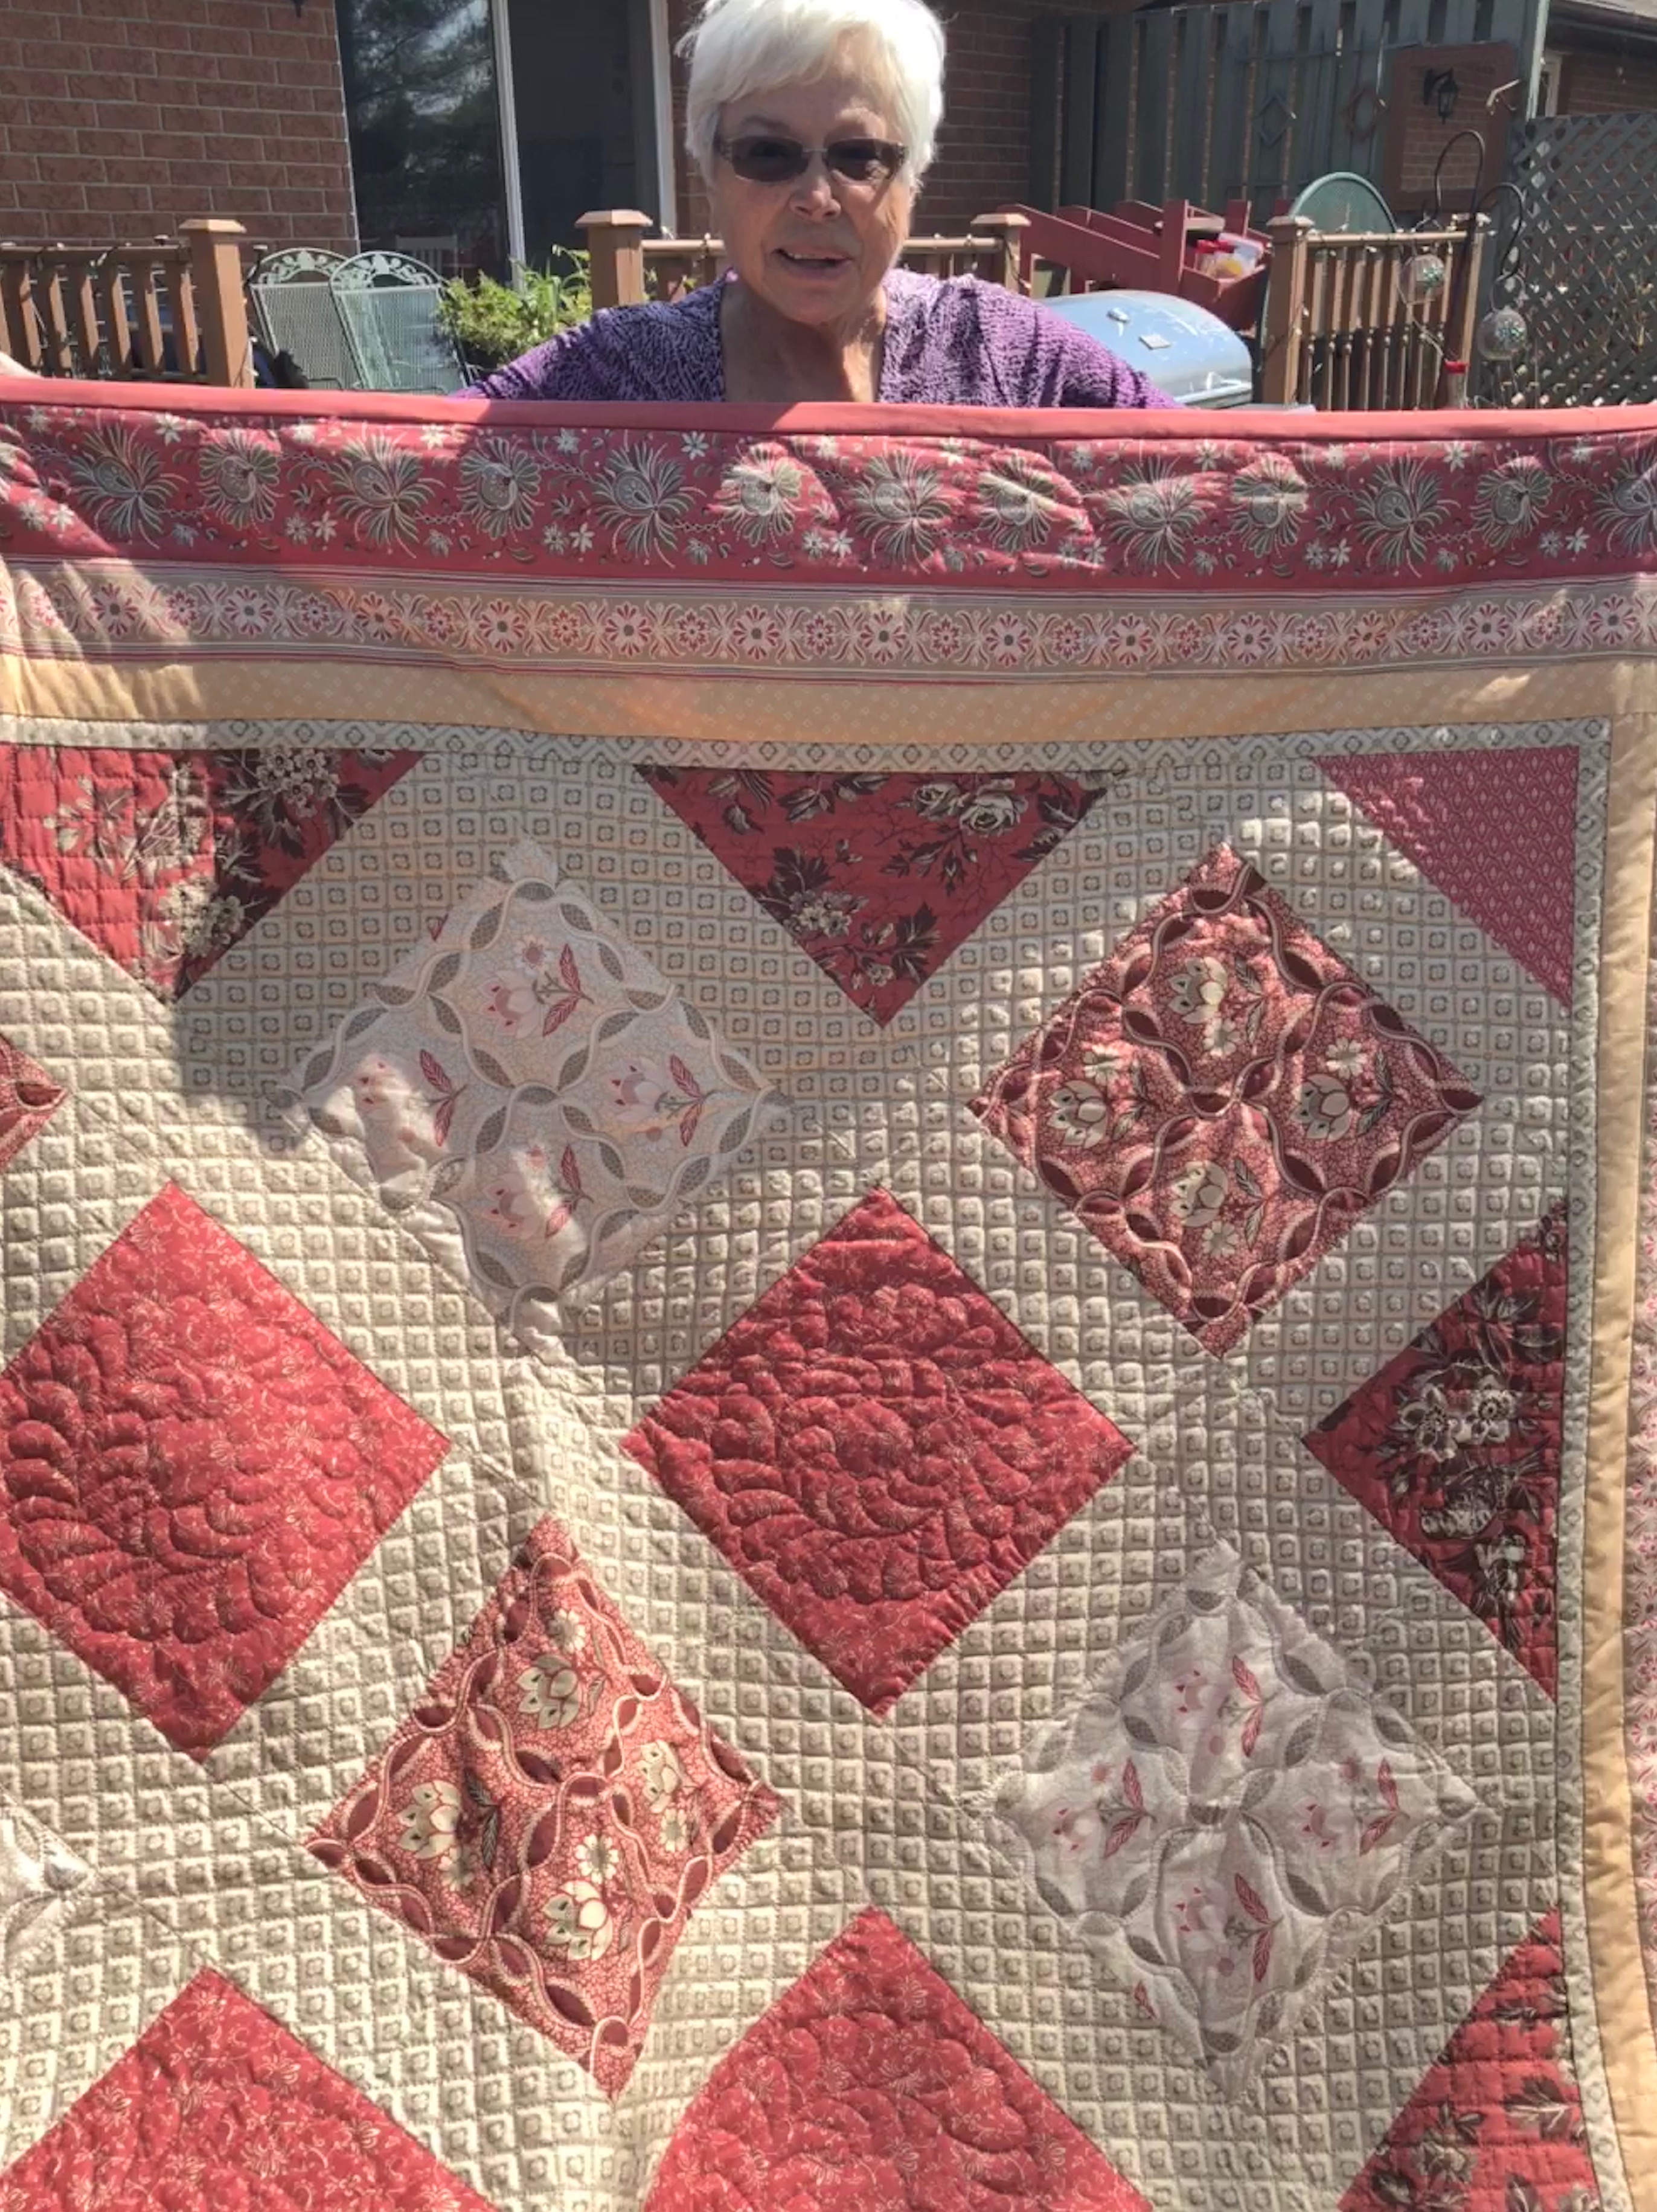 Geraldine holding a quilt that she made.